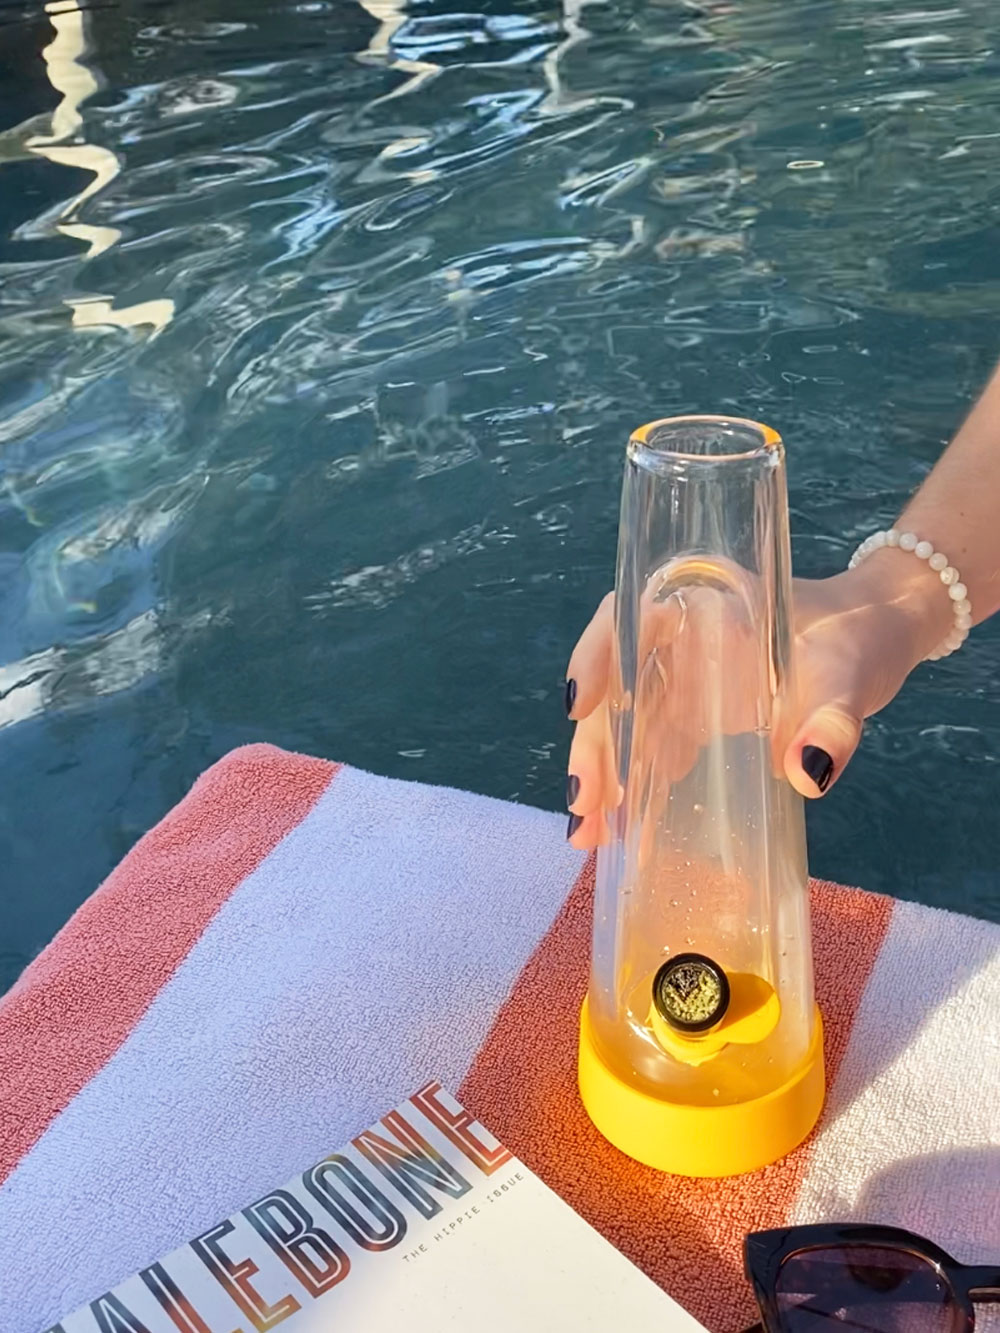 grabbing session goods bong for friends by edge of pool